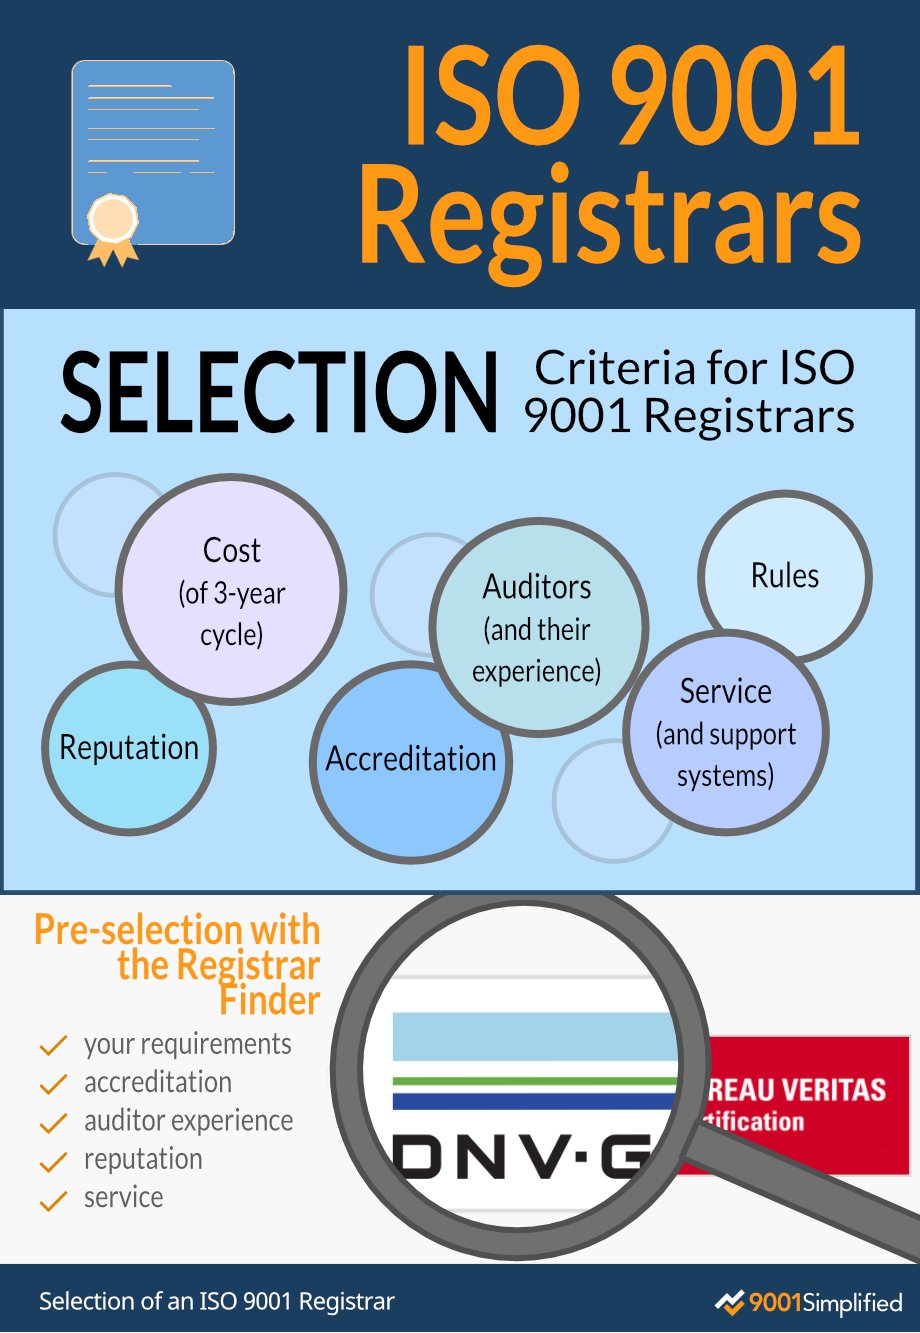 Creating a list of ISO 9001 registrars and selecting the best candidate